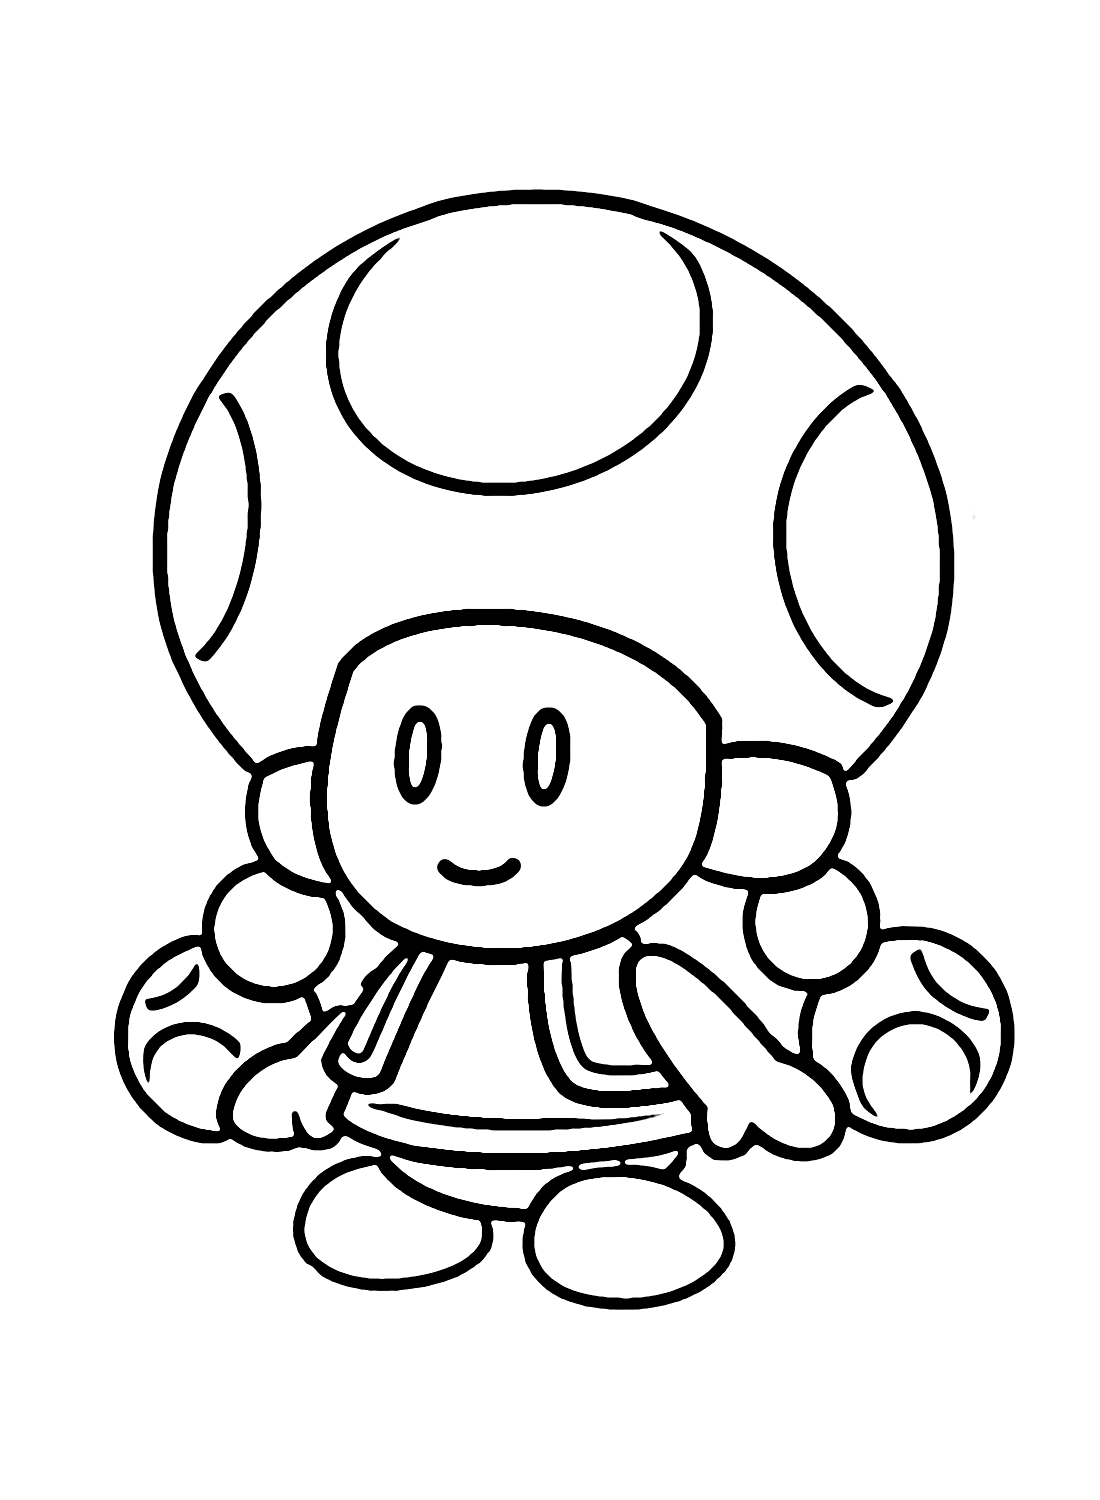 Toadette Images Coloring Page